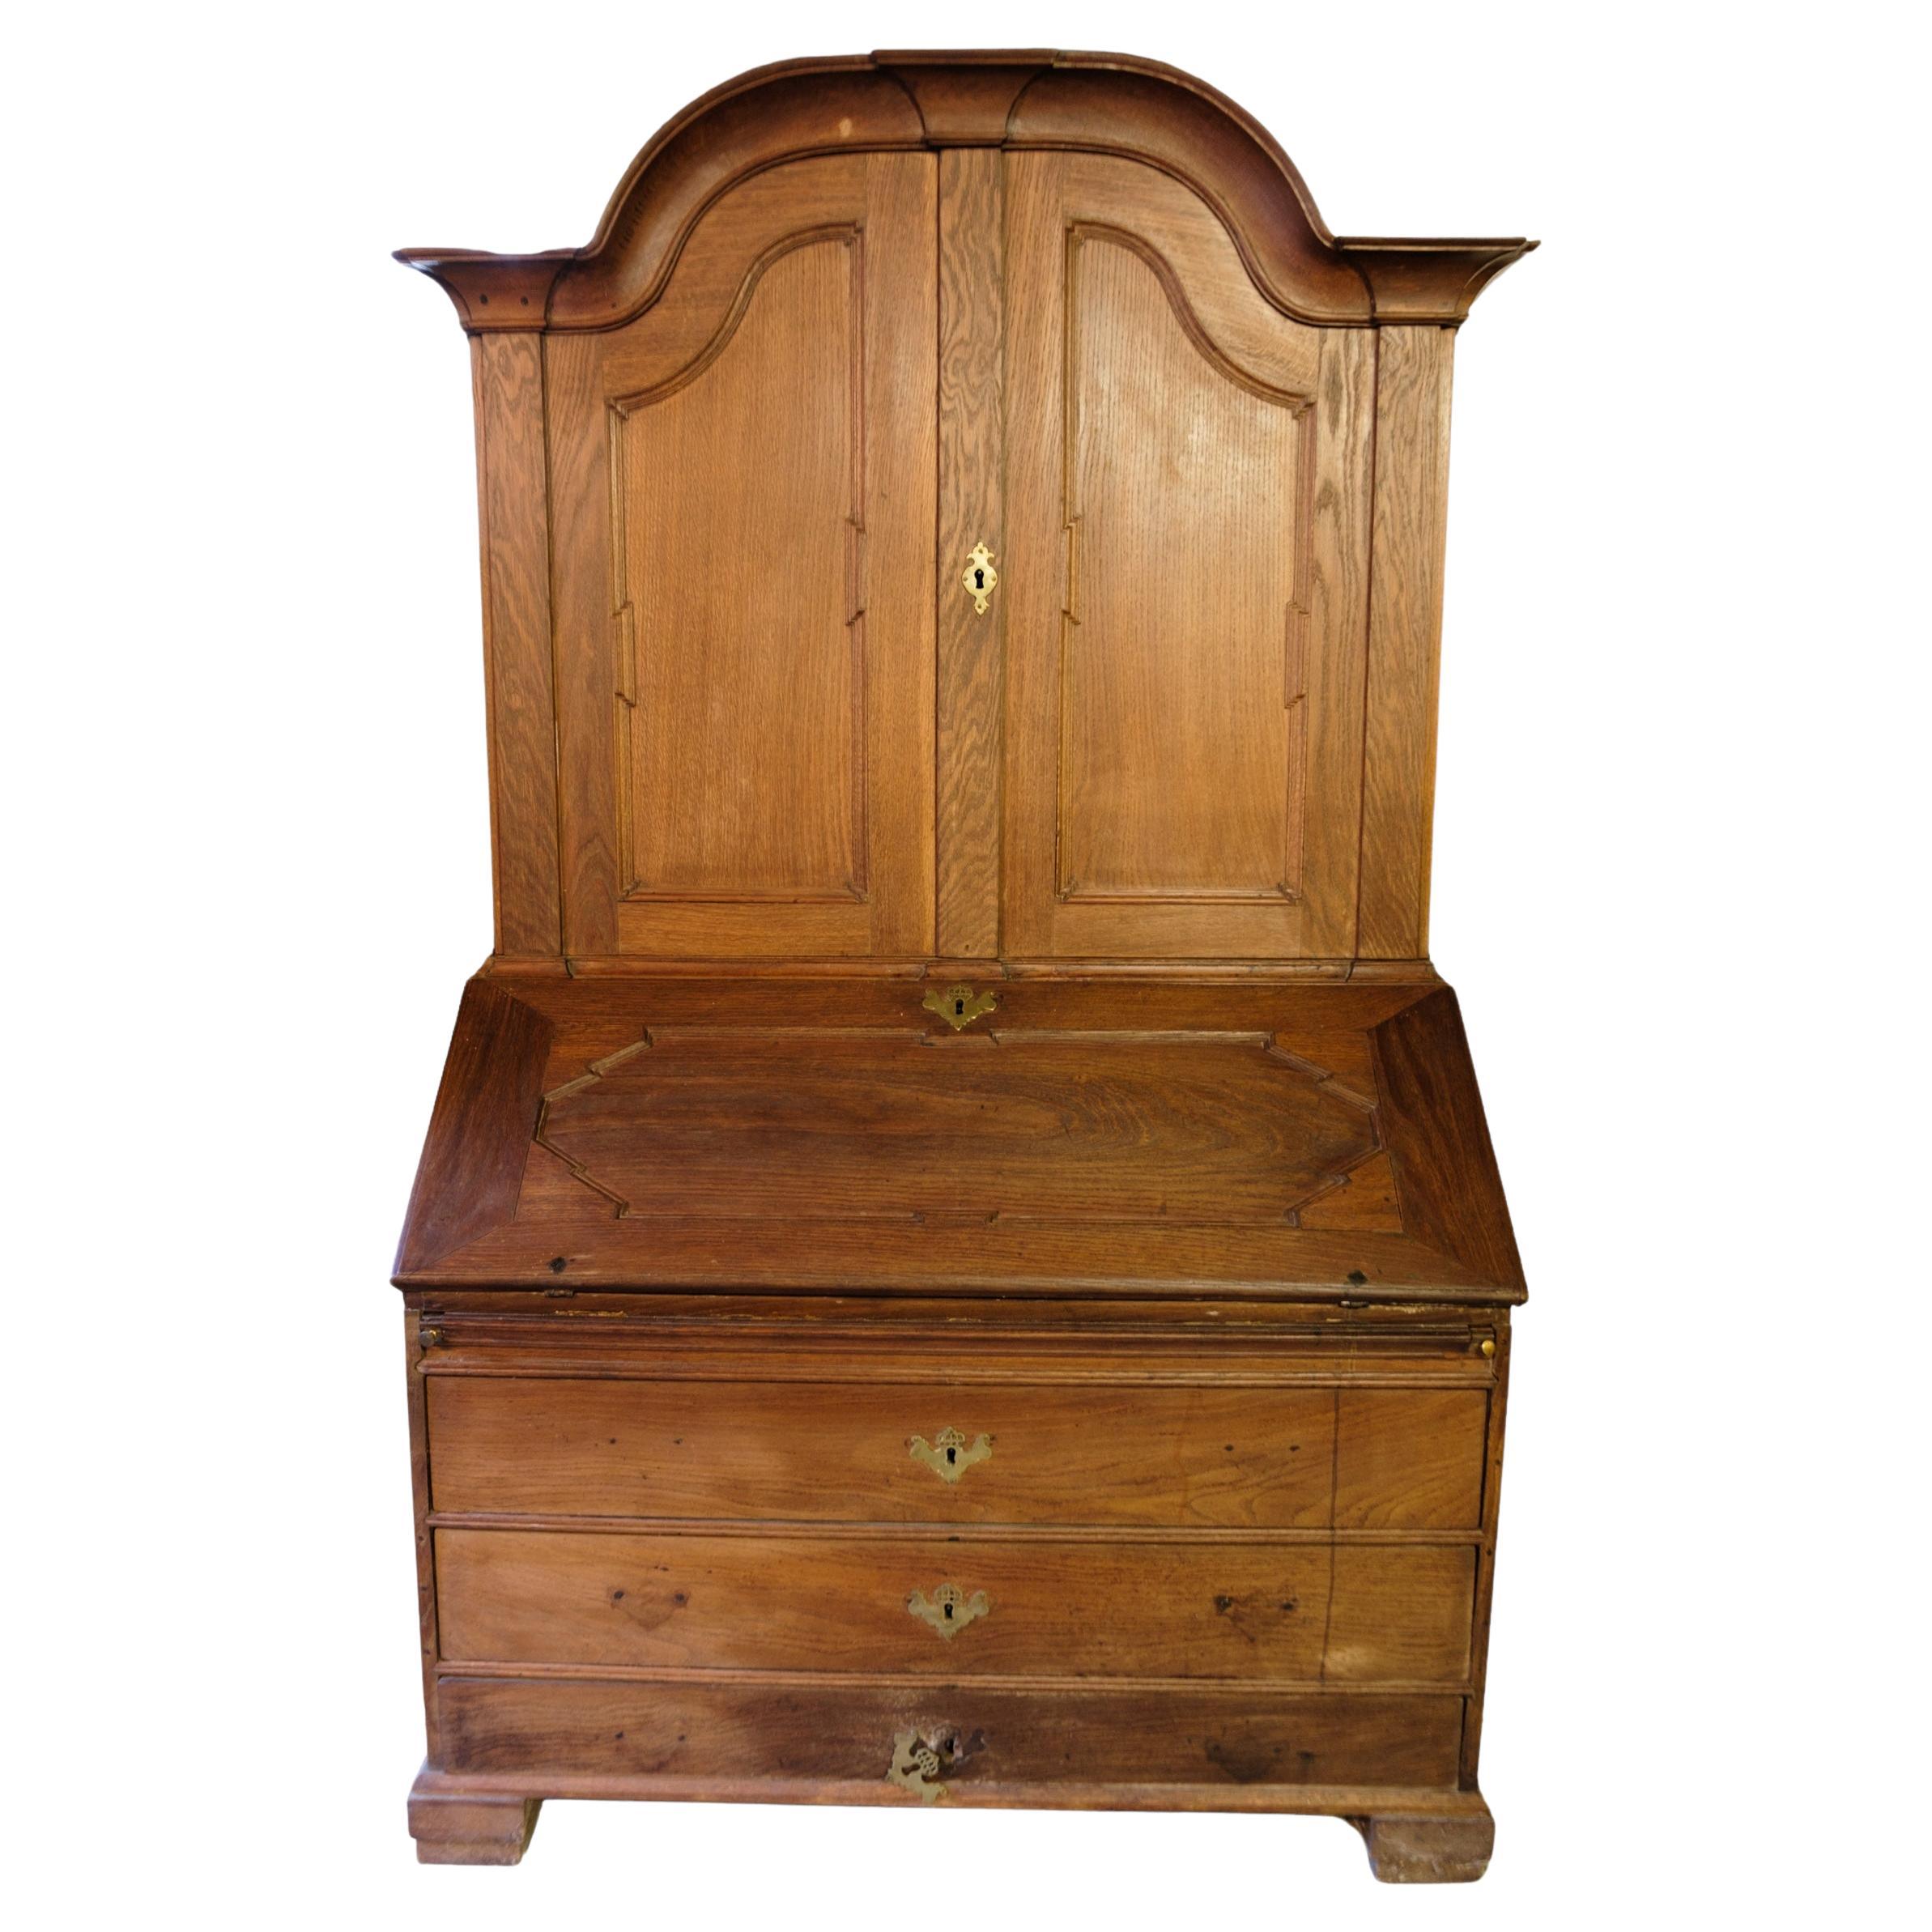 Baroque chatol with drawers made in baroque oak from 1740s